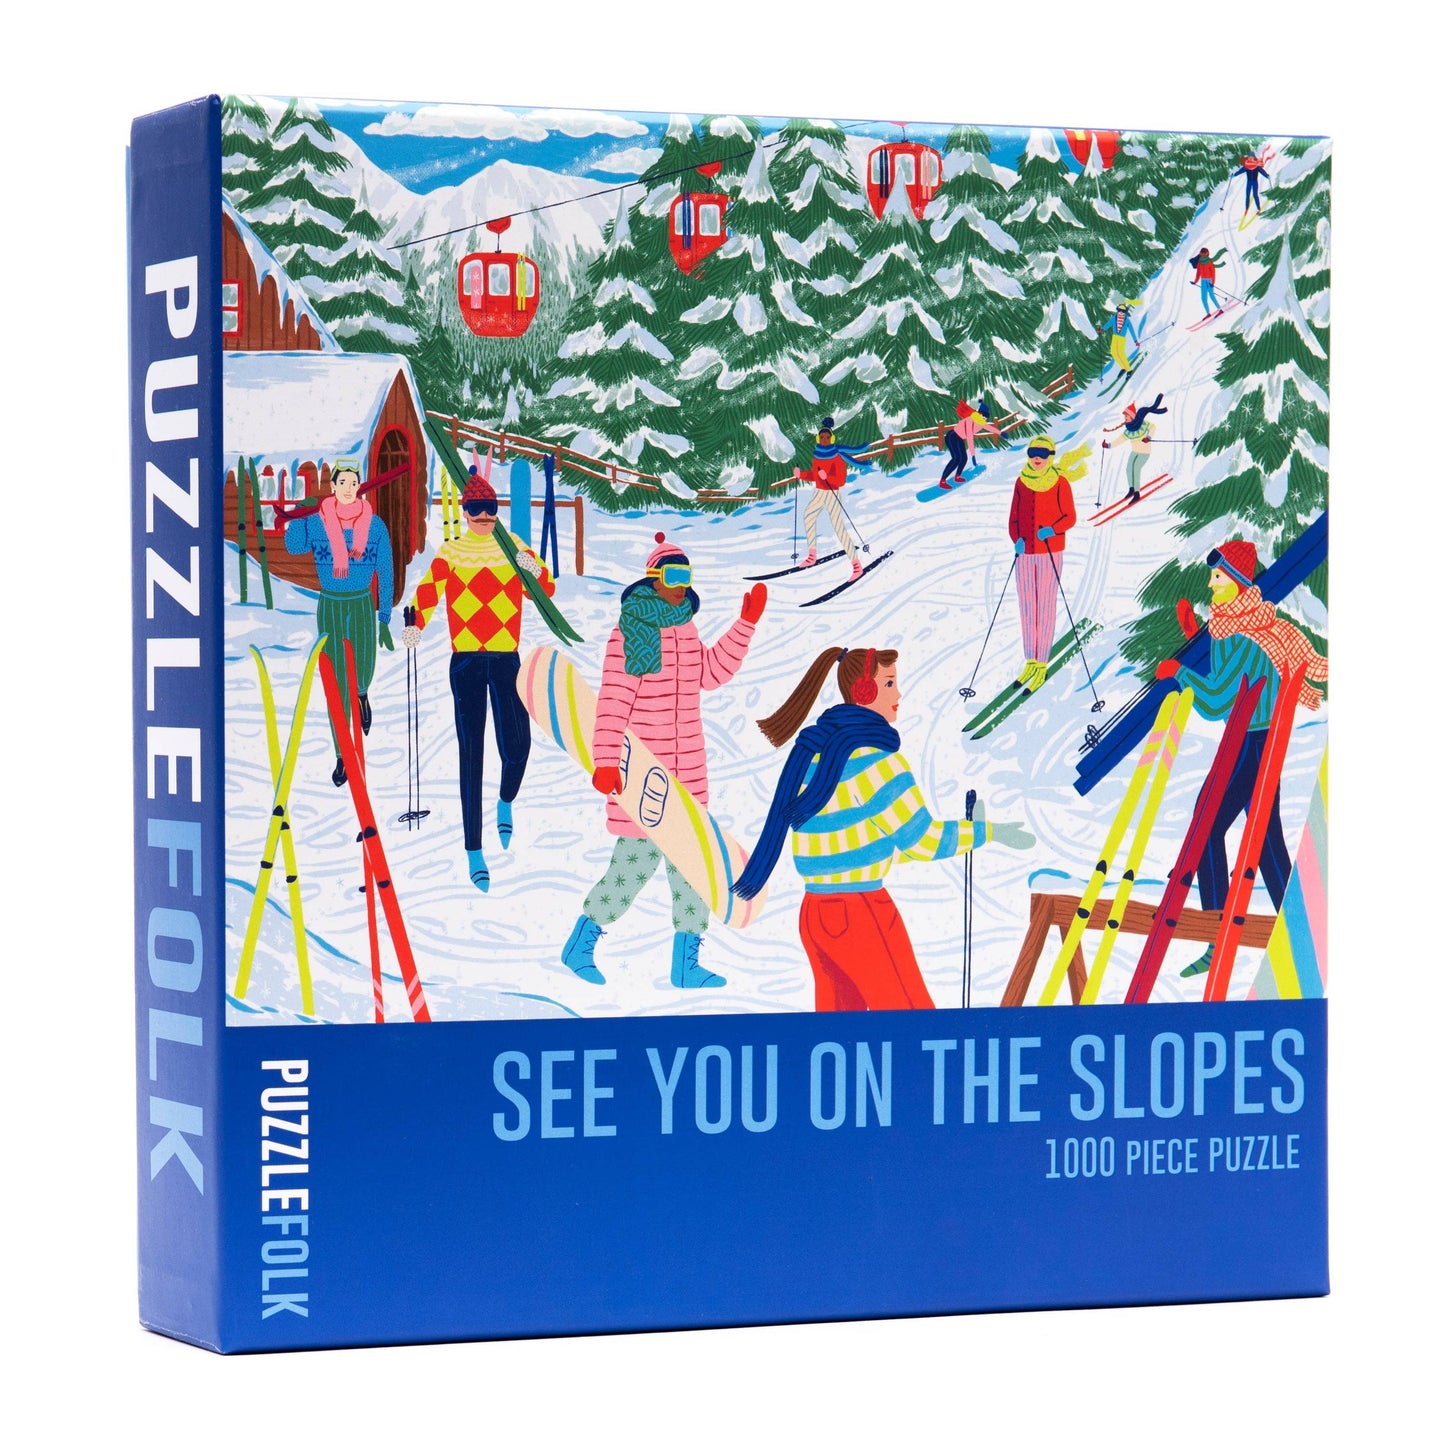 See You On the Slopes